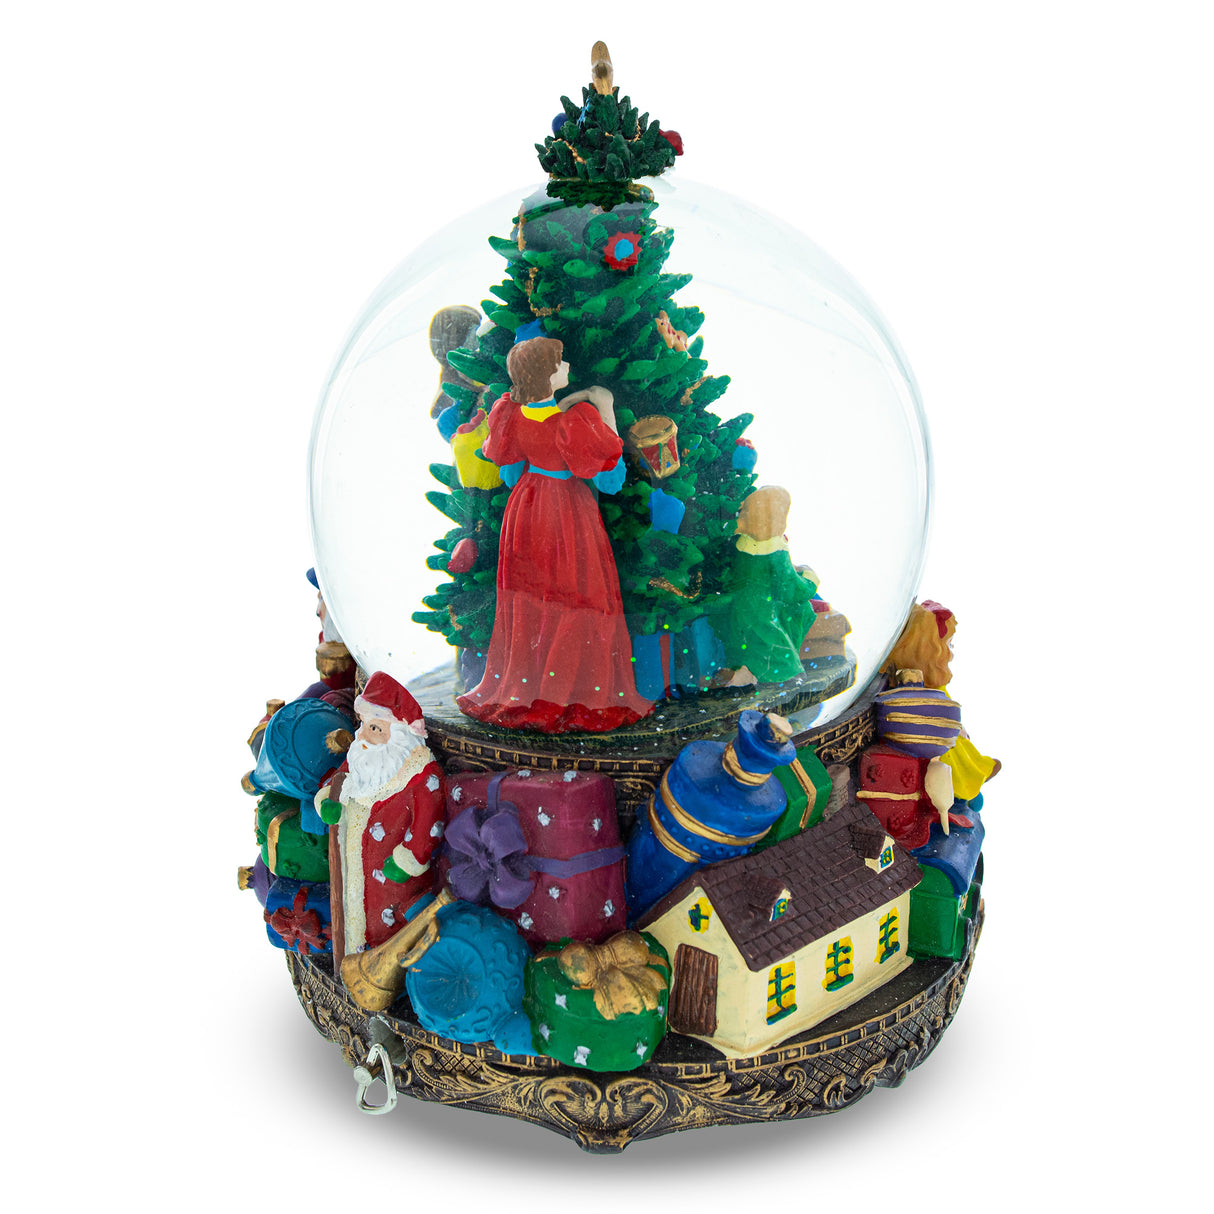 Illuminated Tree Magic: LED Lights Musical Water Snow Globe, 9.6 Inches, with Children Decorating Christmas Tree ,dimensions in inches: 9.6 x 7.2 x 7.2